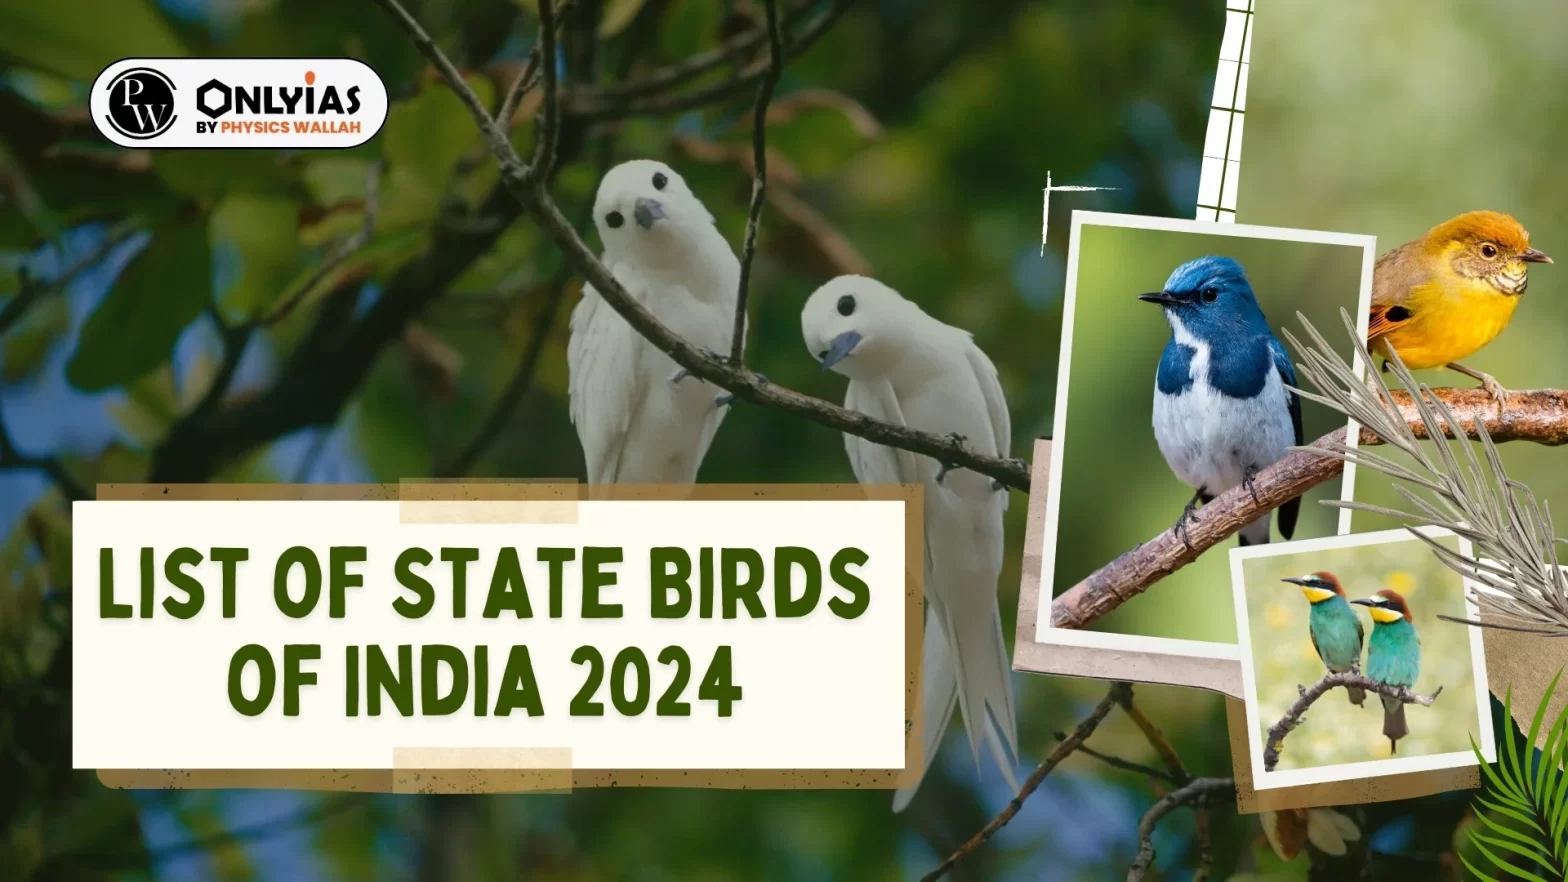 List of State Birds of India 2024